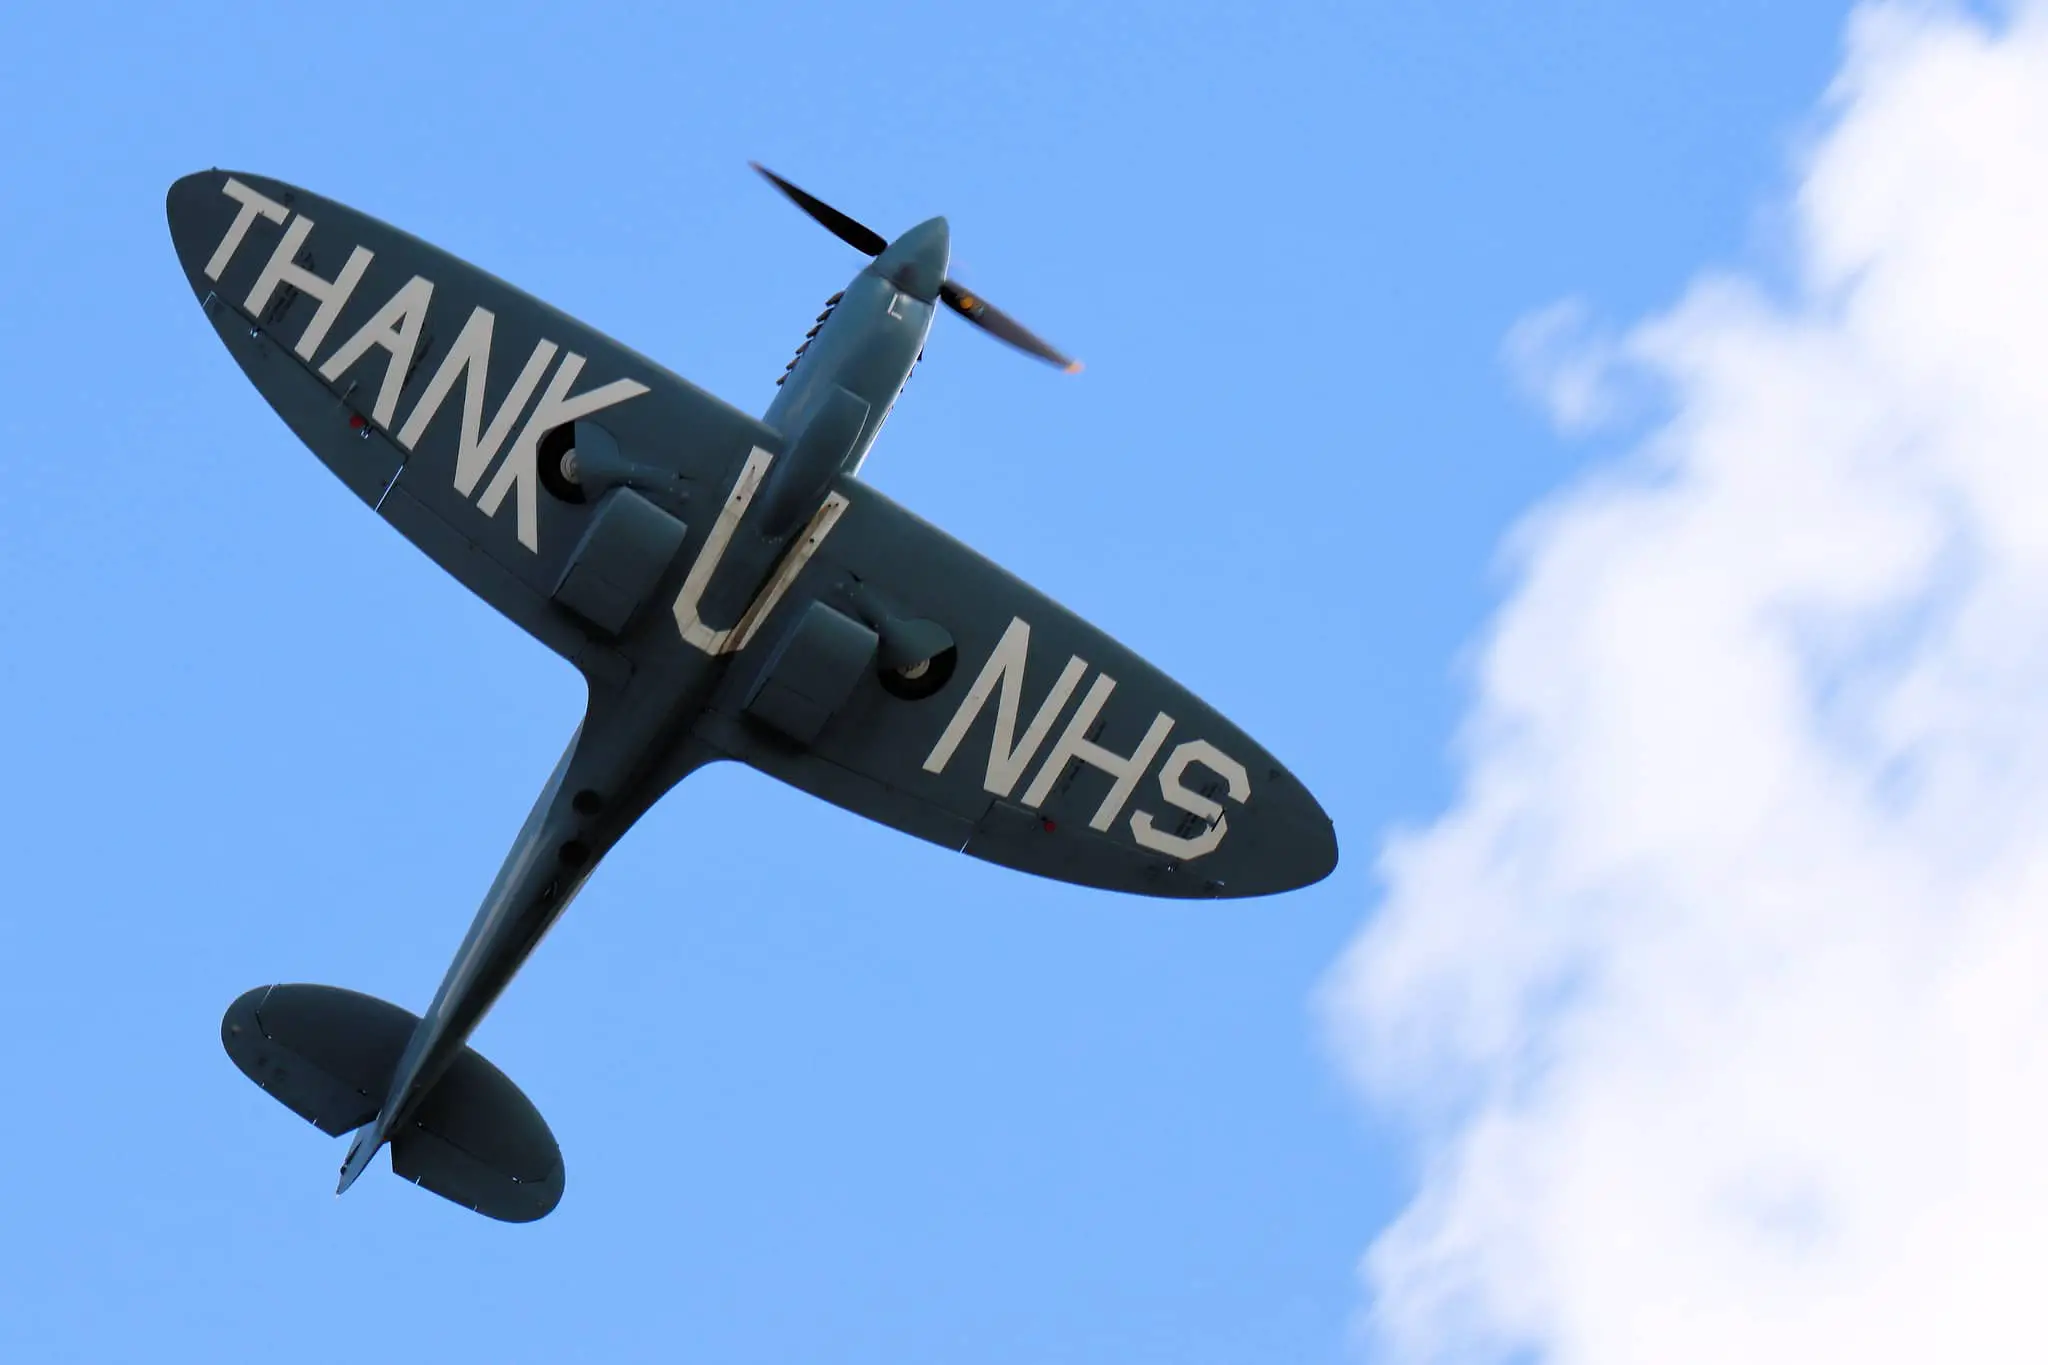 Spitfire with thank you nhs message on bottom of it